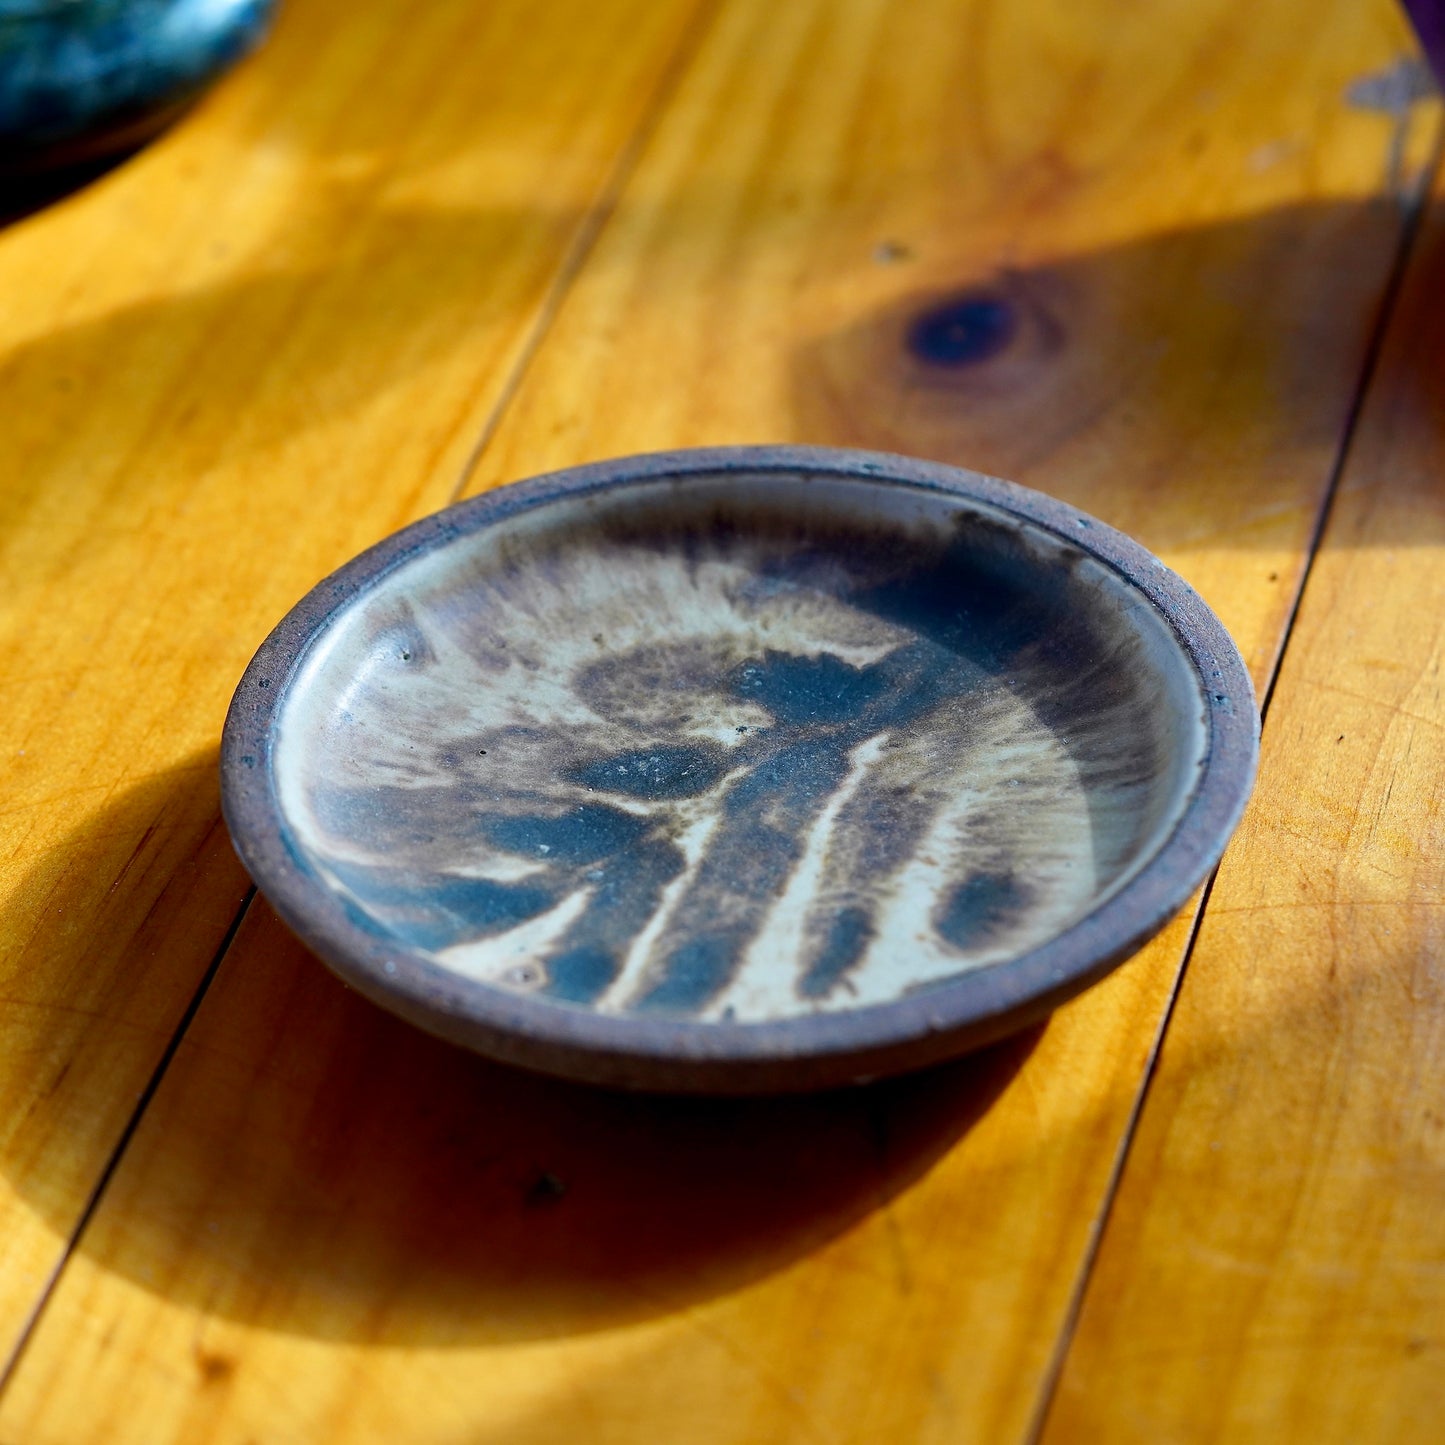 Distant photo of brown and white Moroccan inspired ceramic dish set on a light wood floor, with a labradorite crystal showing at the top left corner of the frame